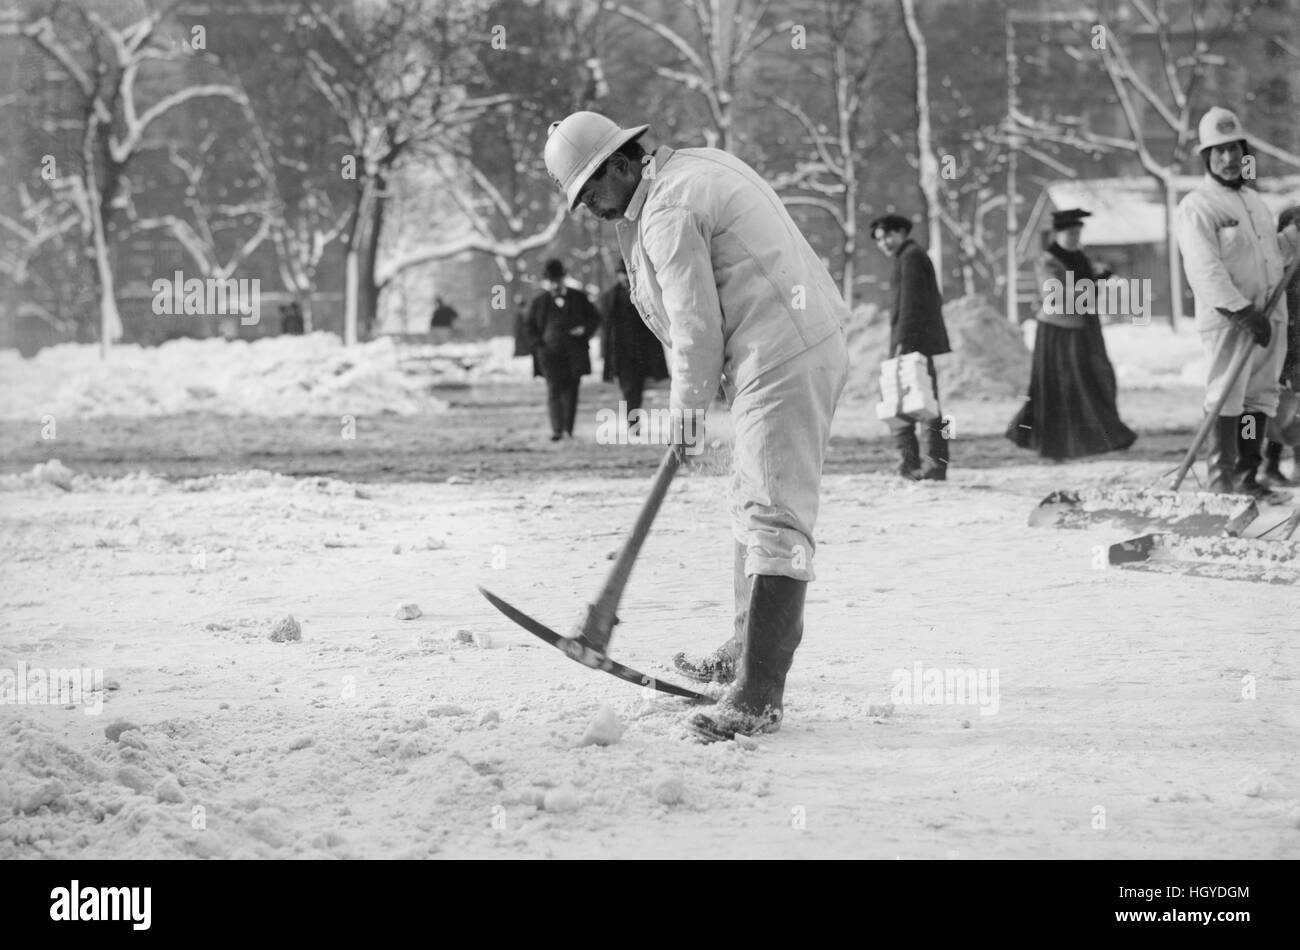 Man Clearing Snow from Street with Pickaxe, New York City, New York, USA, Bain News Service, January 1908 Stock Photo